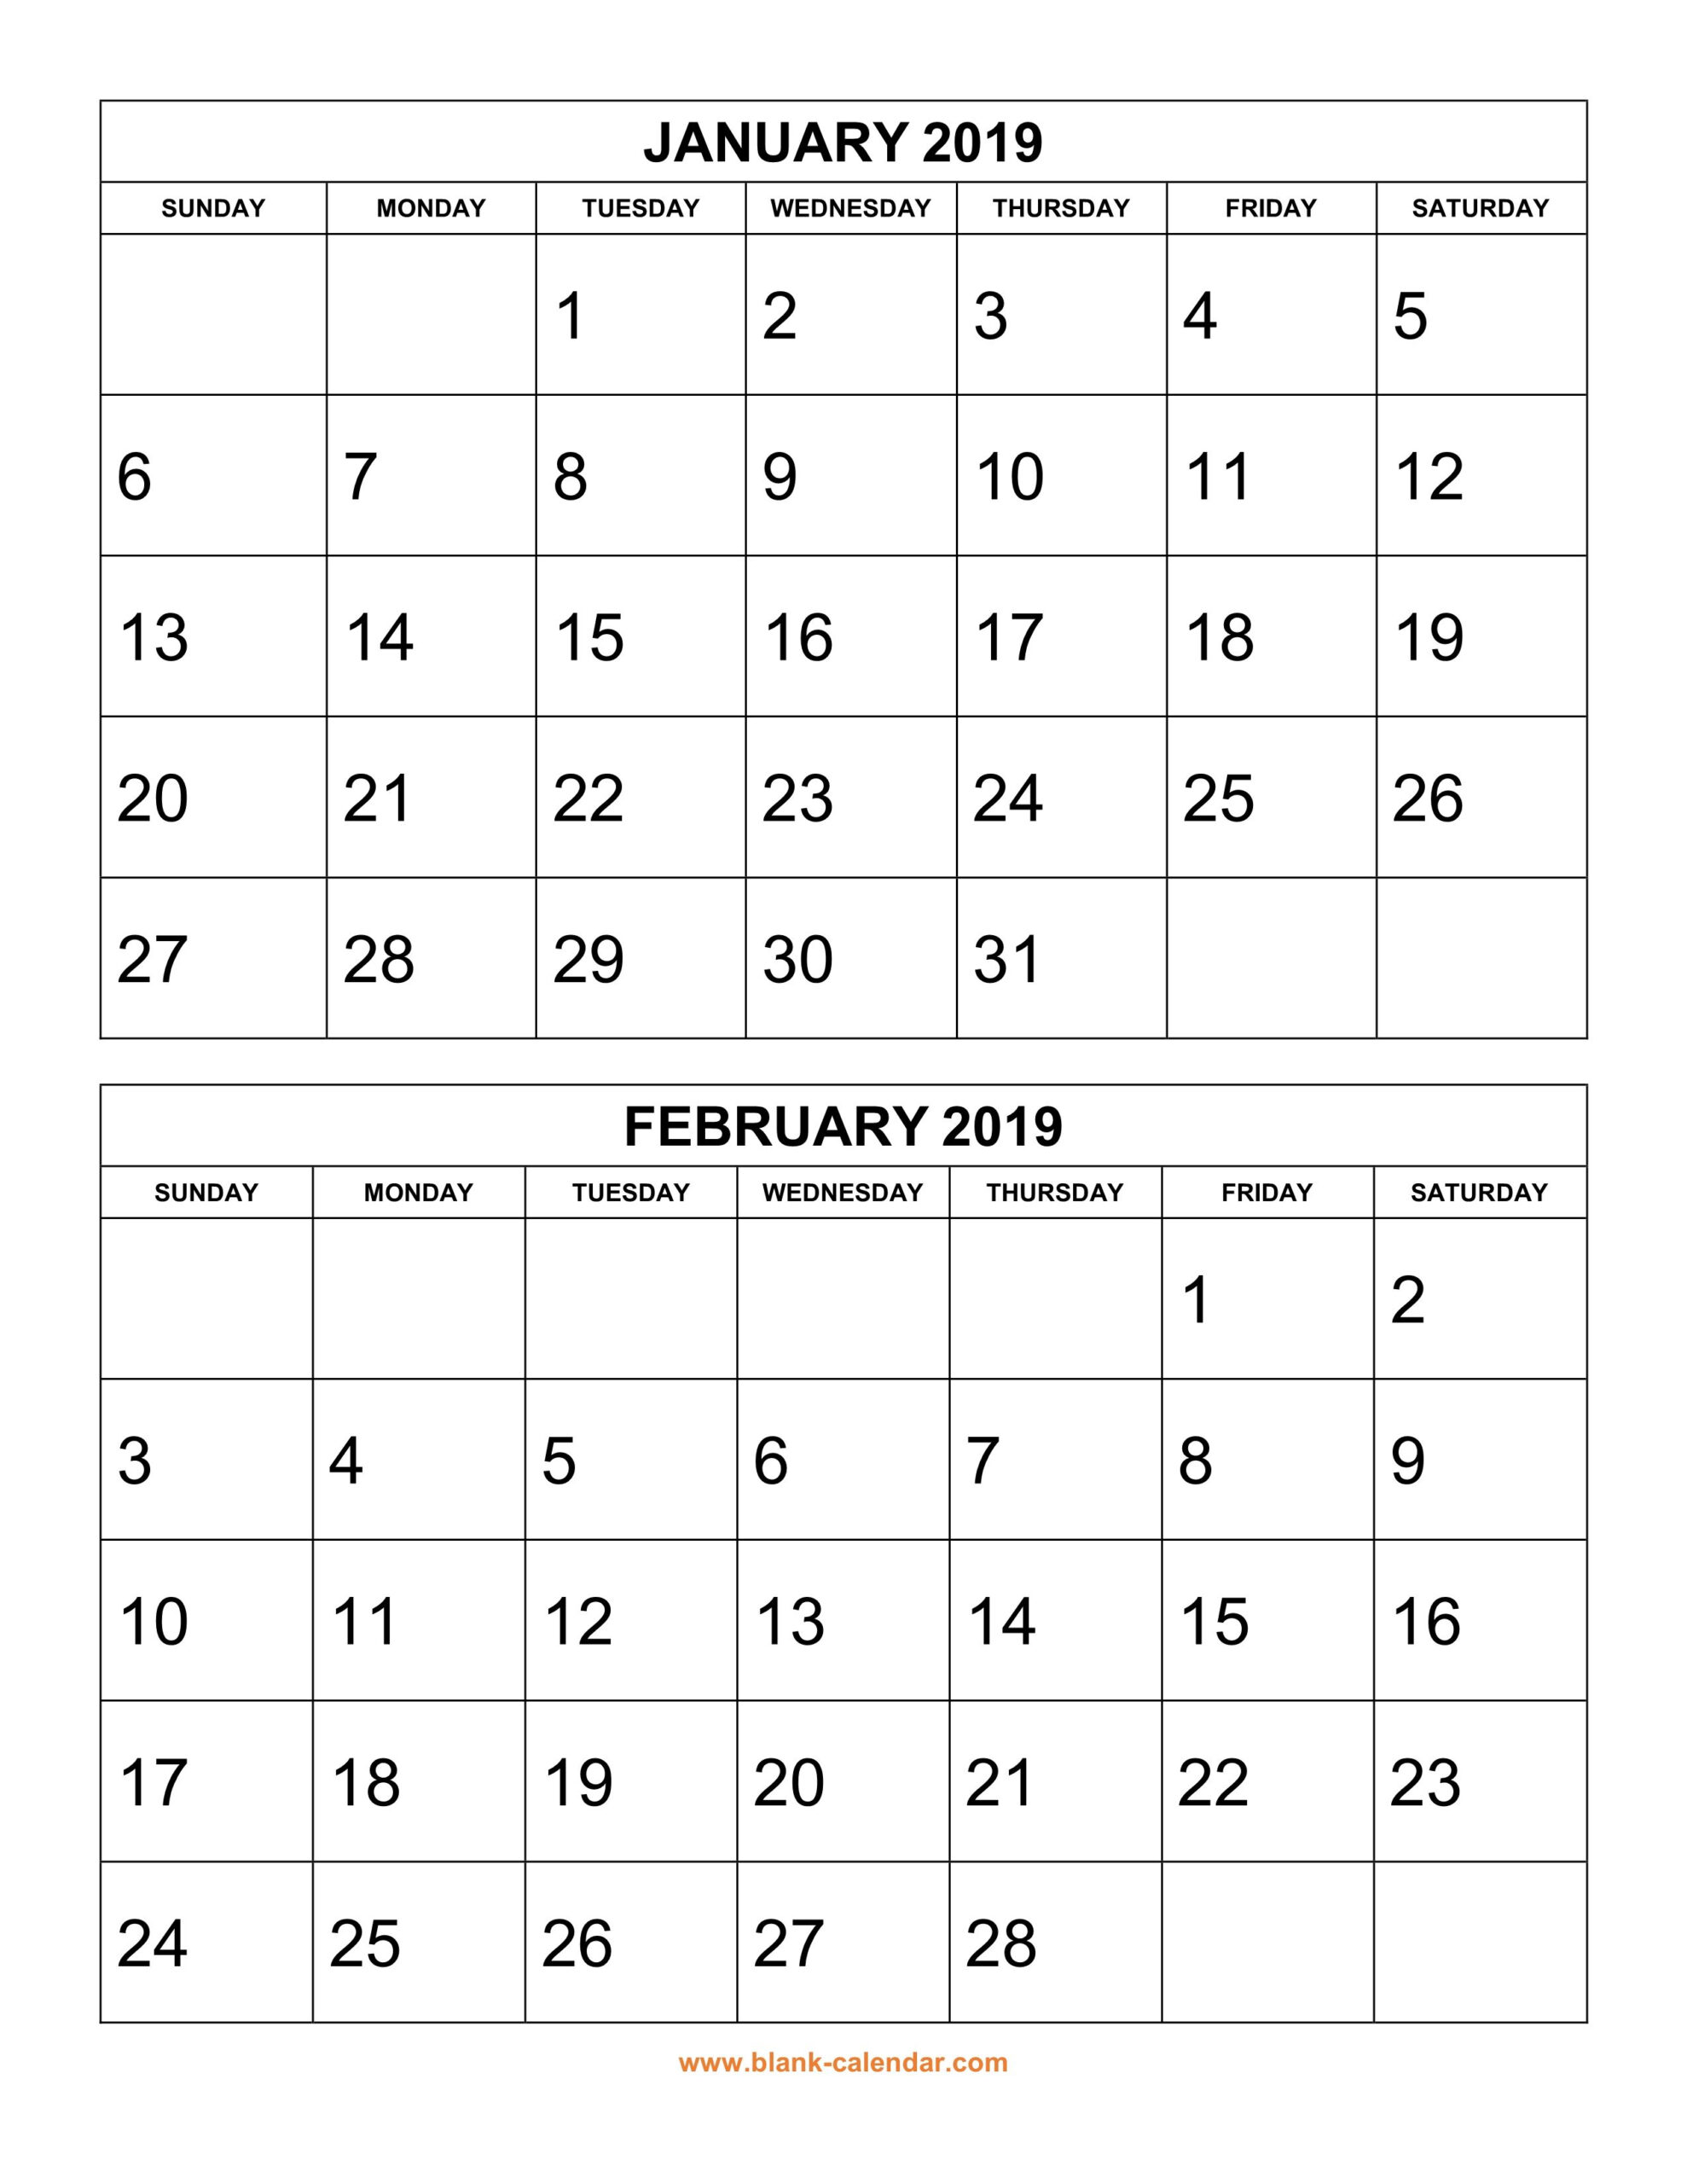 Download Printable Calendar 2019 On 6 Pages, 2 Months Per